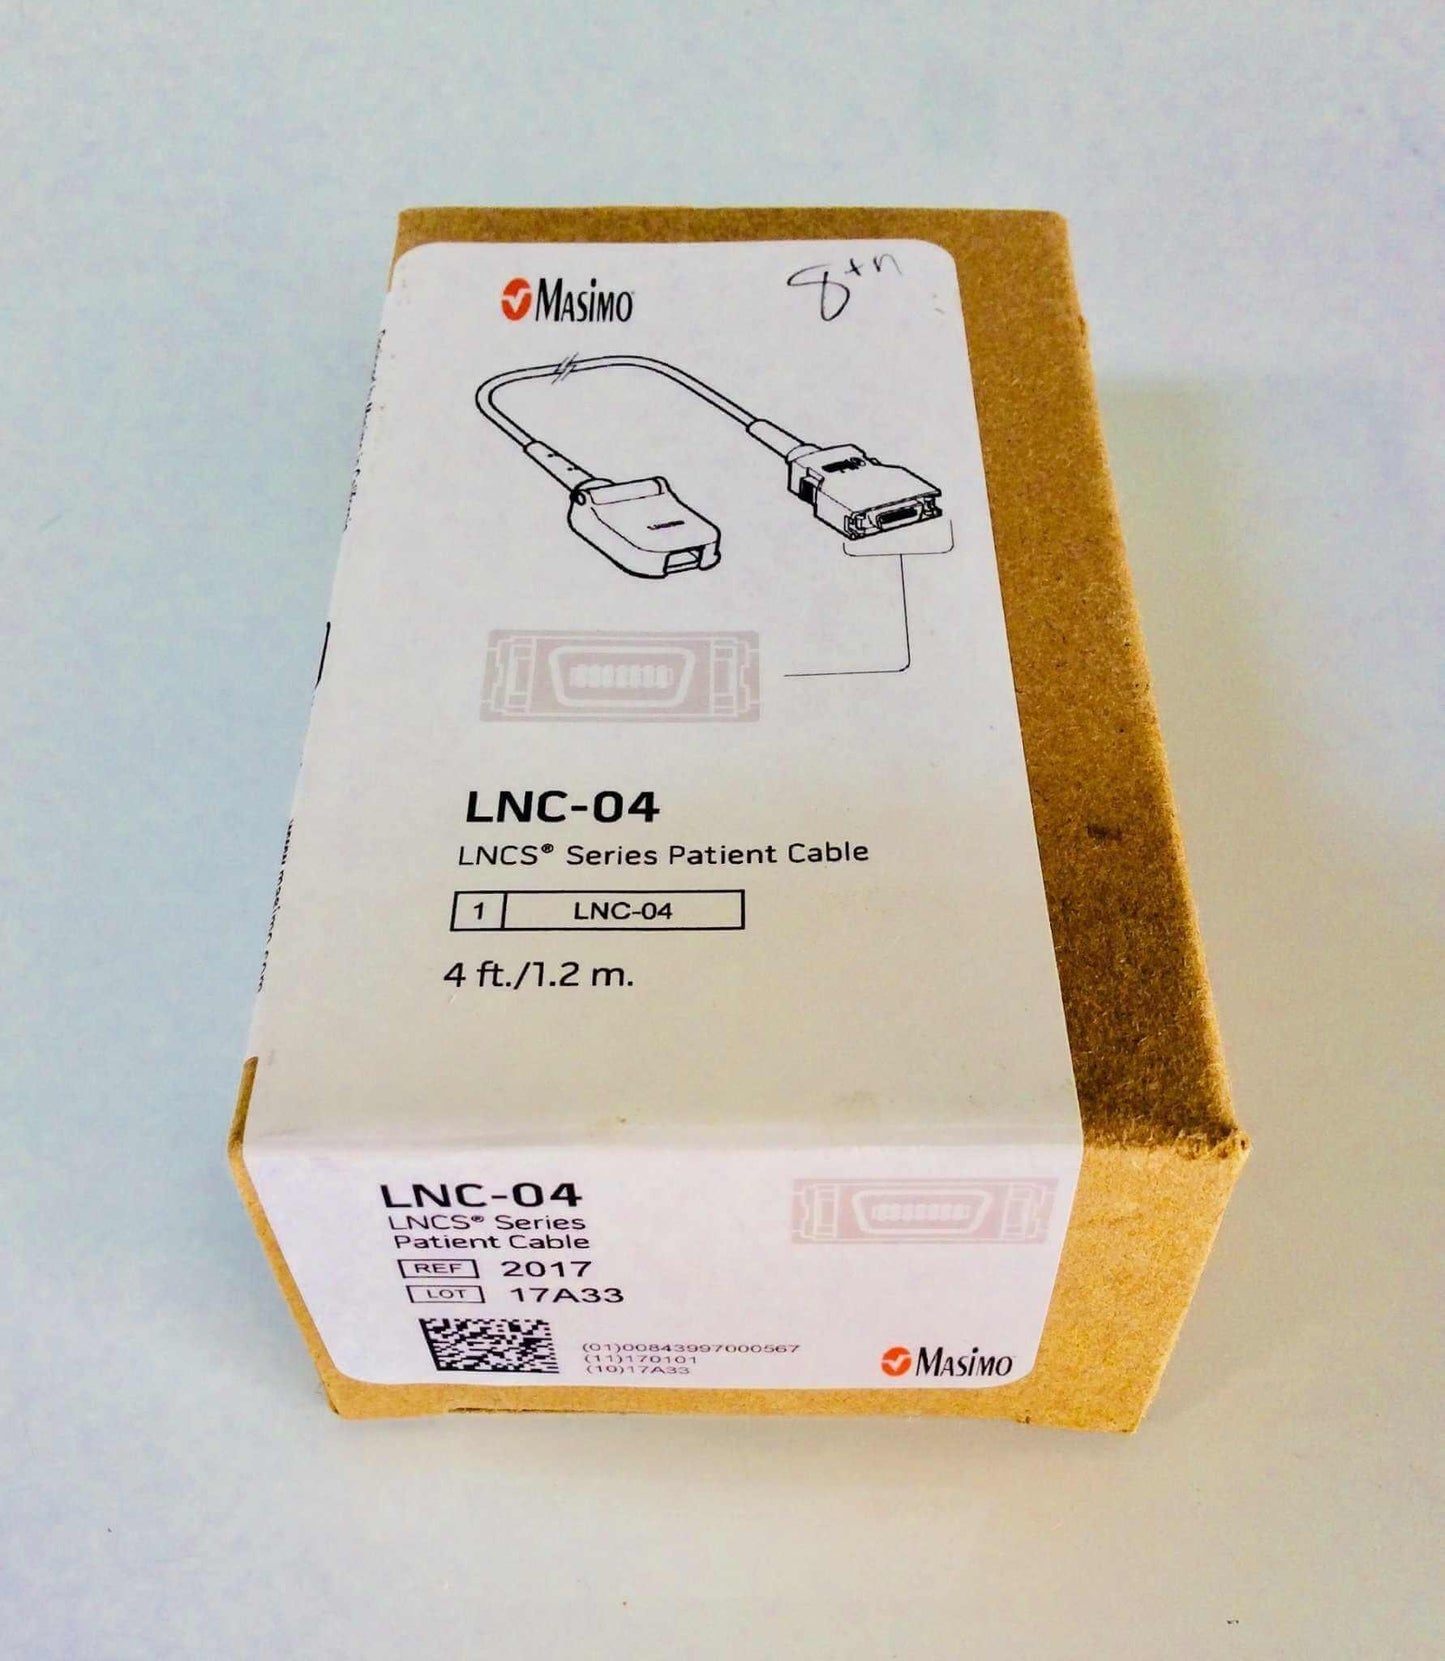 NEW Masimo LNCS Series  4' FT Patient Cable LNC-04 2017 Warranty FREE Shipping - MBR Medicals